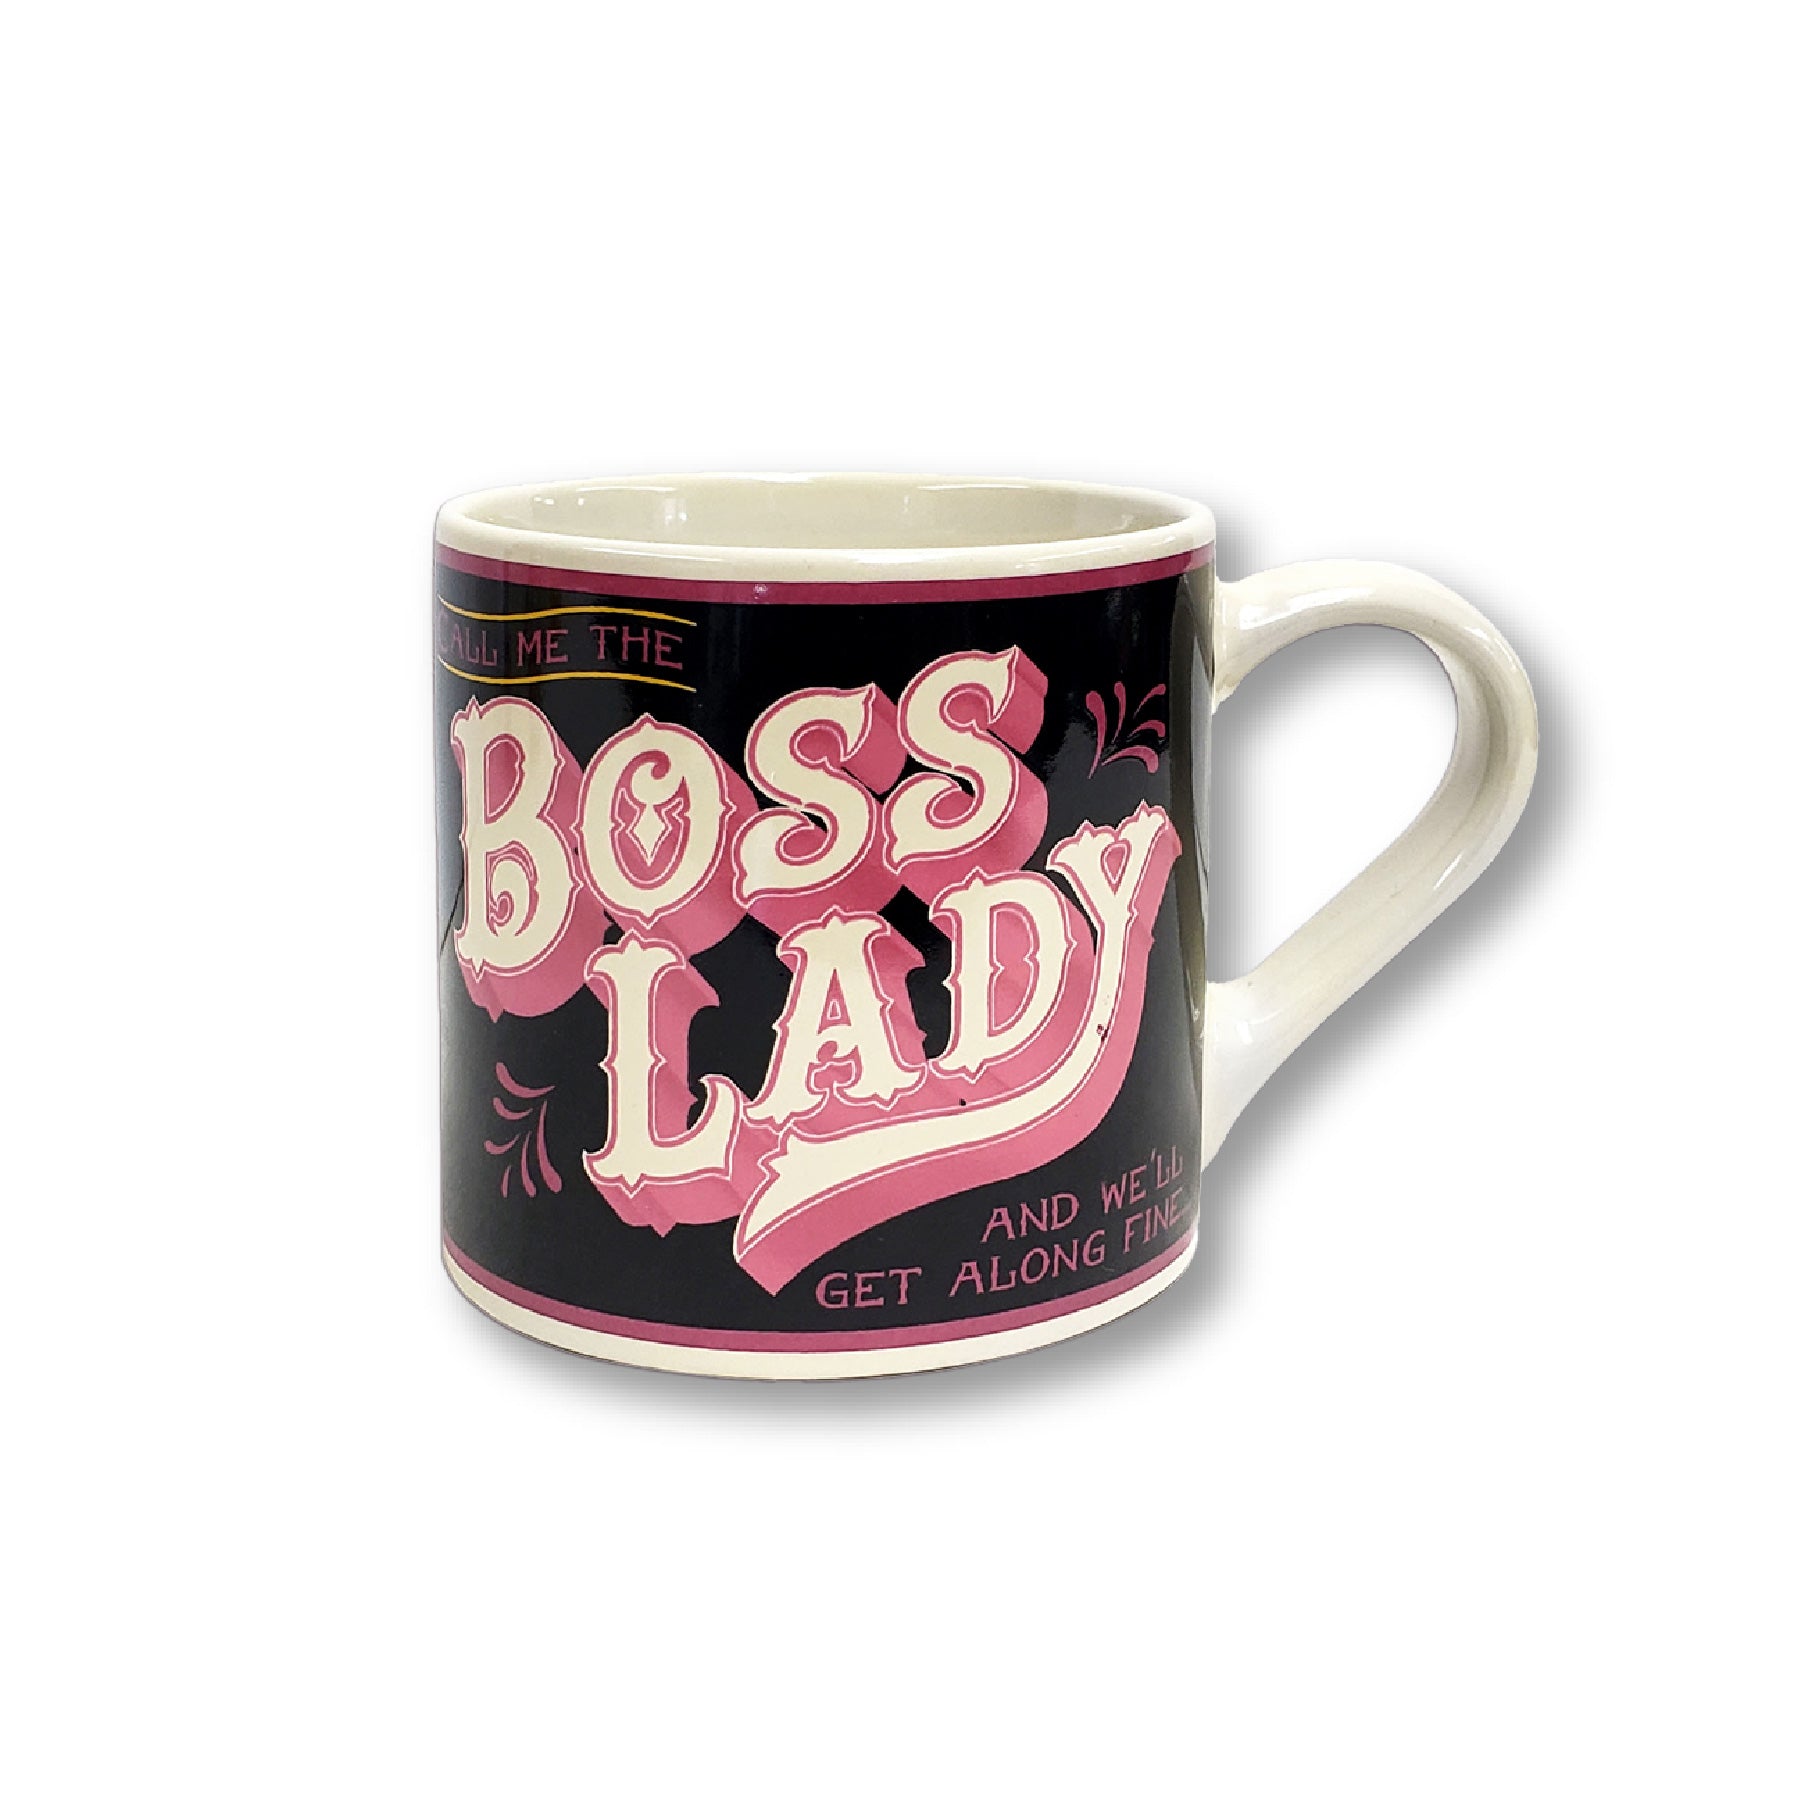 ceramic tea or coffee mug. cafe cup reads "Boss Lady" in pink, black, and off white retro vintage style